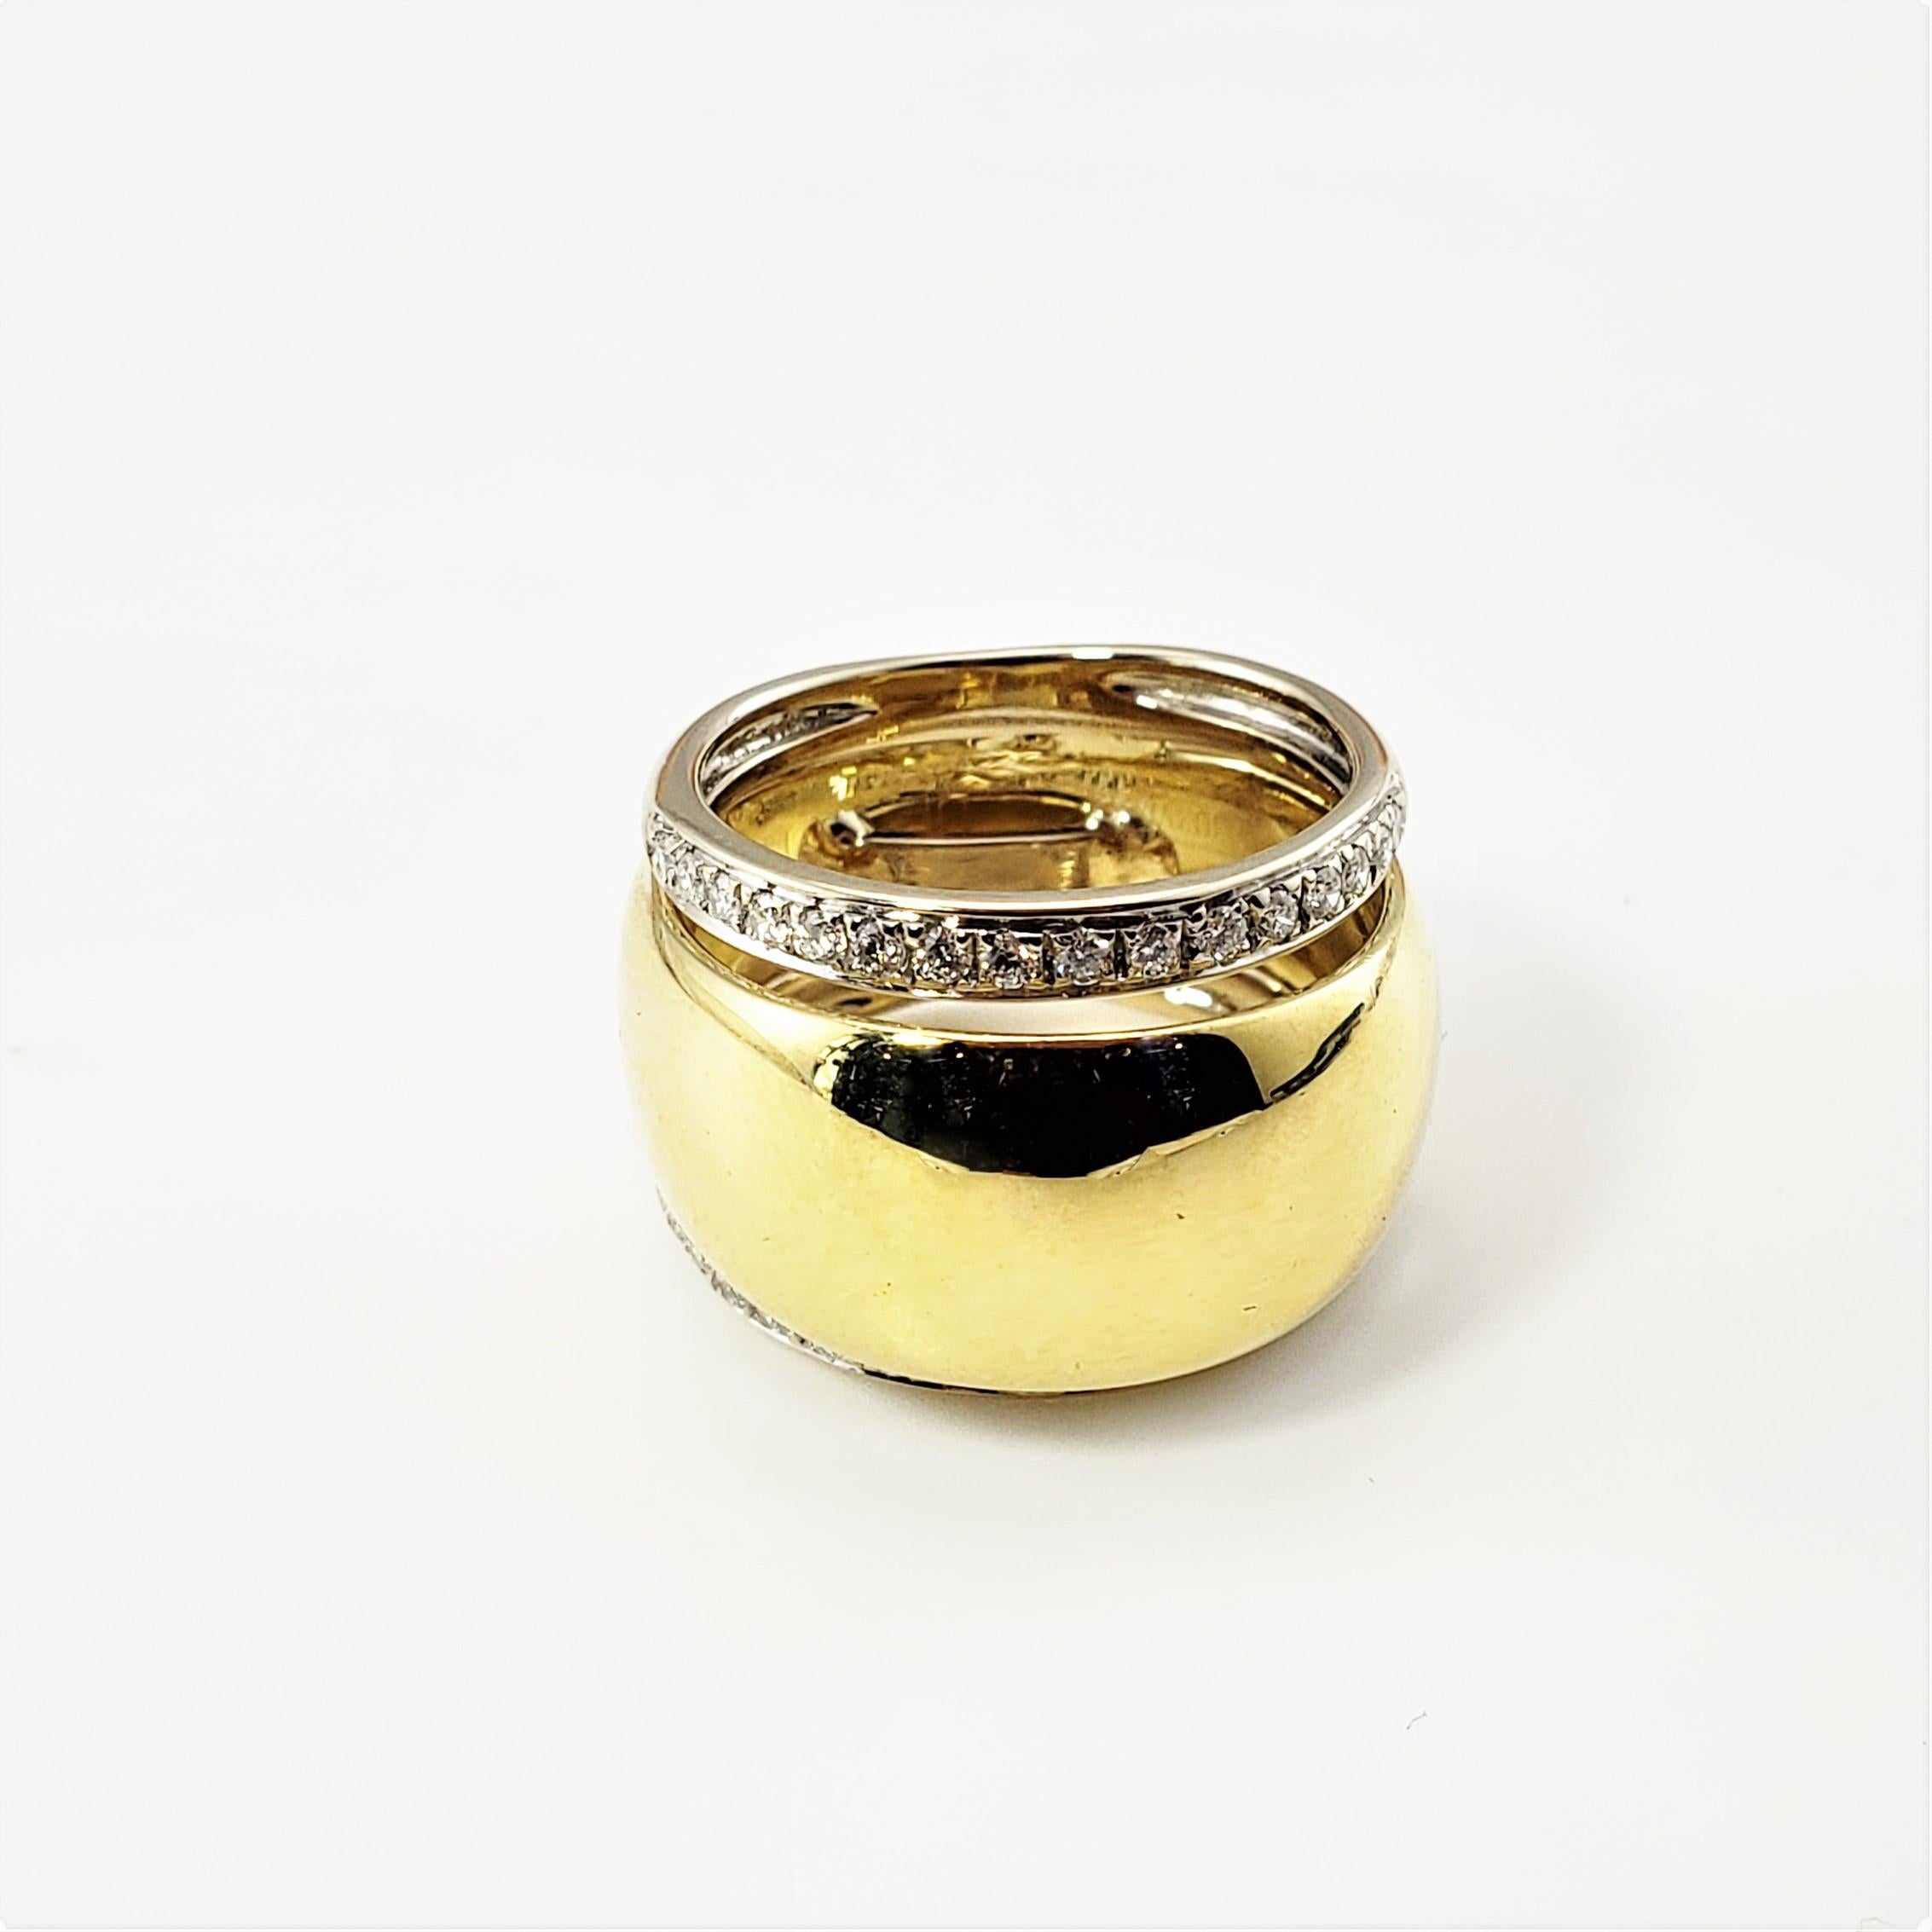 18 Karat Yellow Gold and Diamond Band Ring Size 6-

This stunning band features 32 round brilliant cut diamonds set in classic 18K yellow gold.

Approximate total diamond weight:  .32 ct.

Diamond color:  G

Diamond clarity:  VS1

Ring Size: